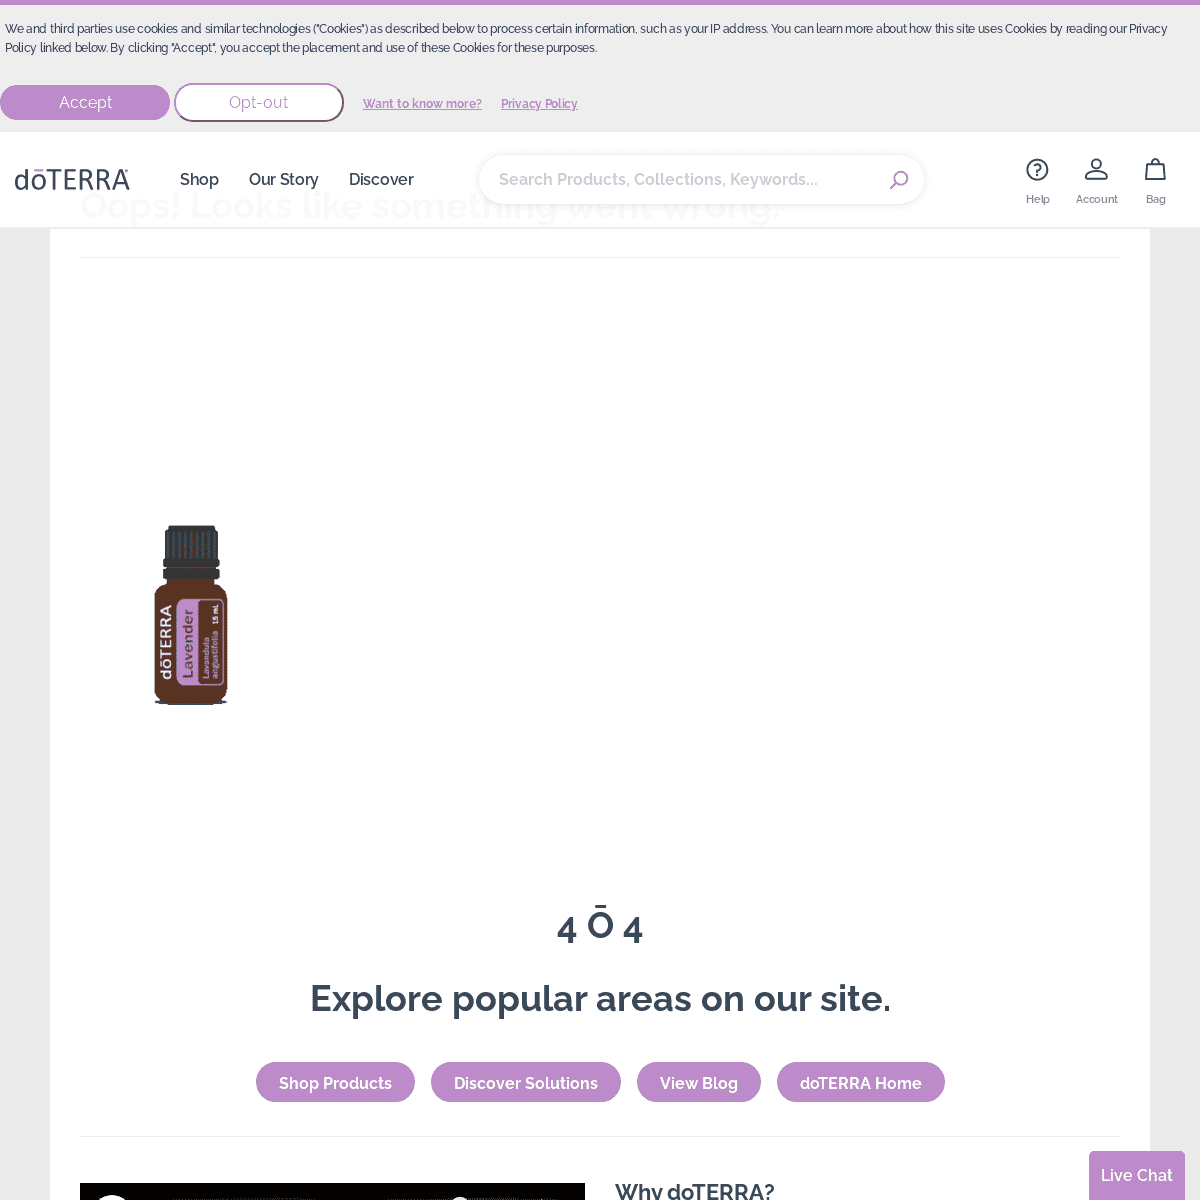 A complete backup of https://doterra.me